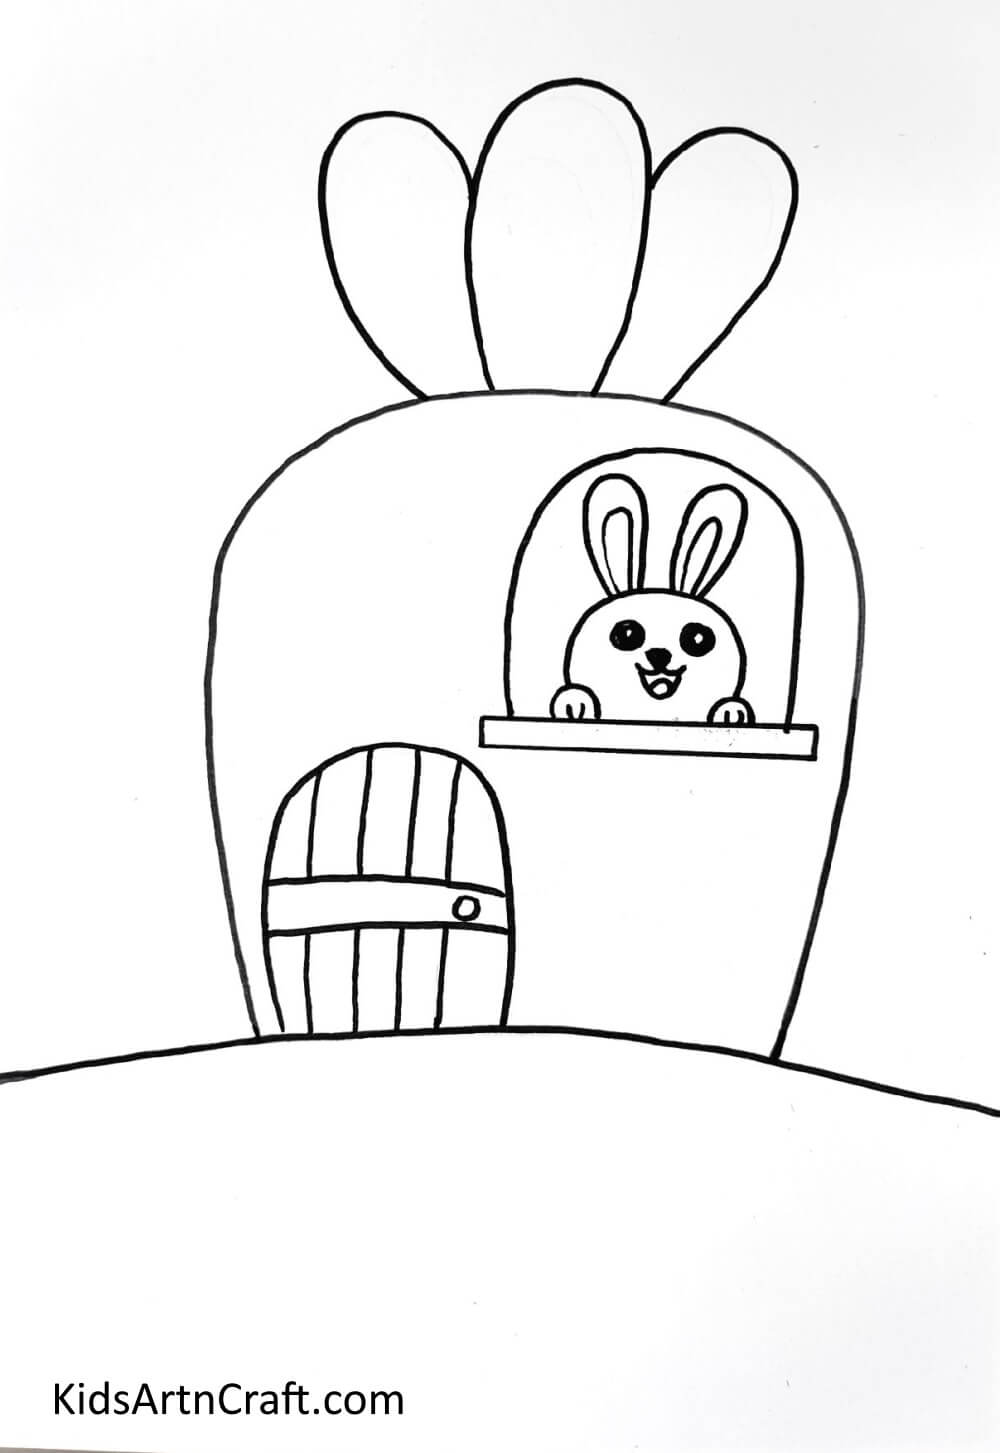 Drawing A Bunny - Simple Steps to Draw a Bunny Abode